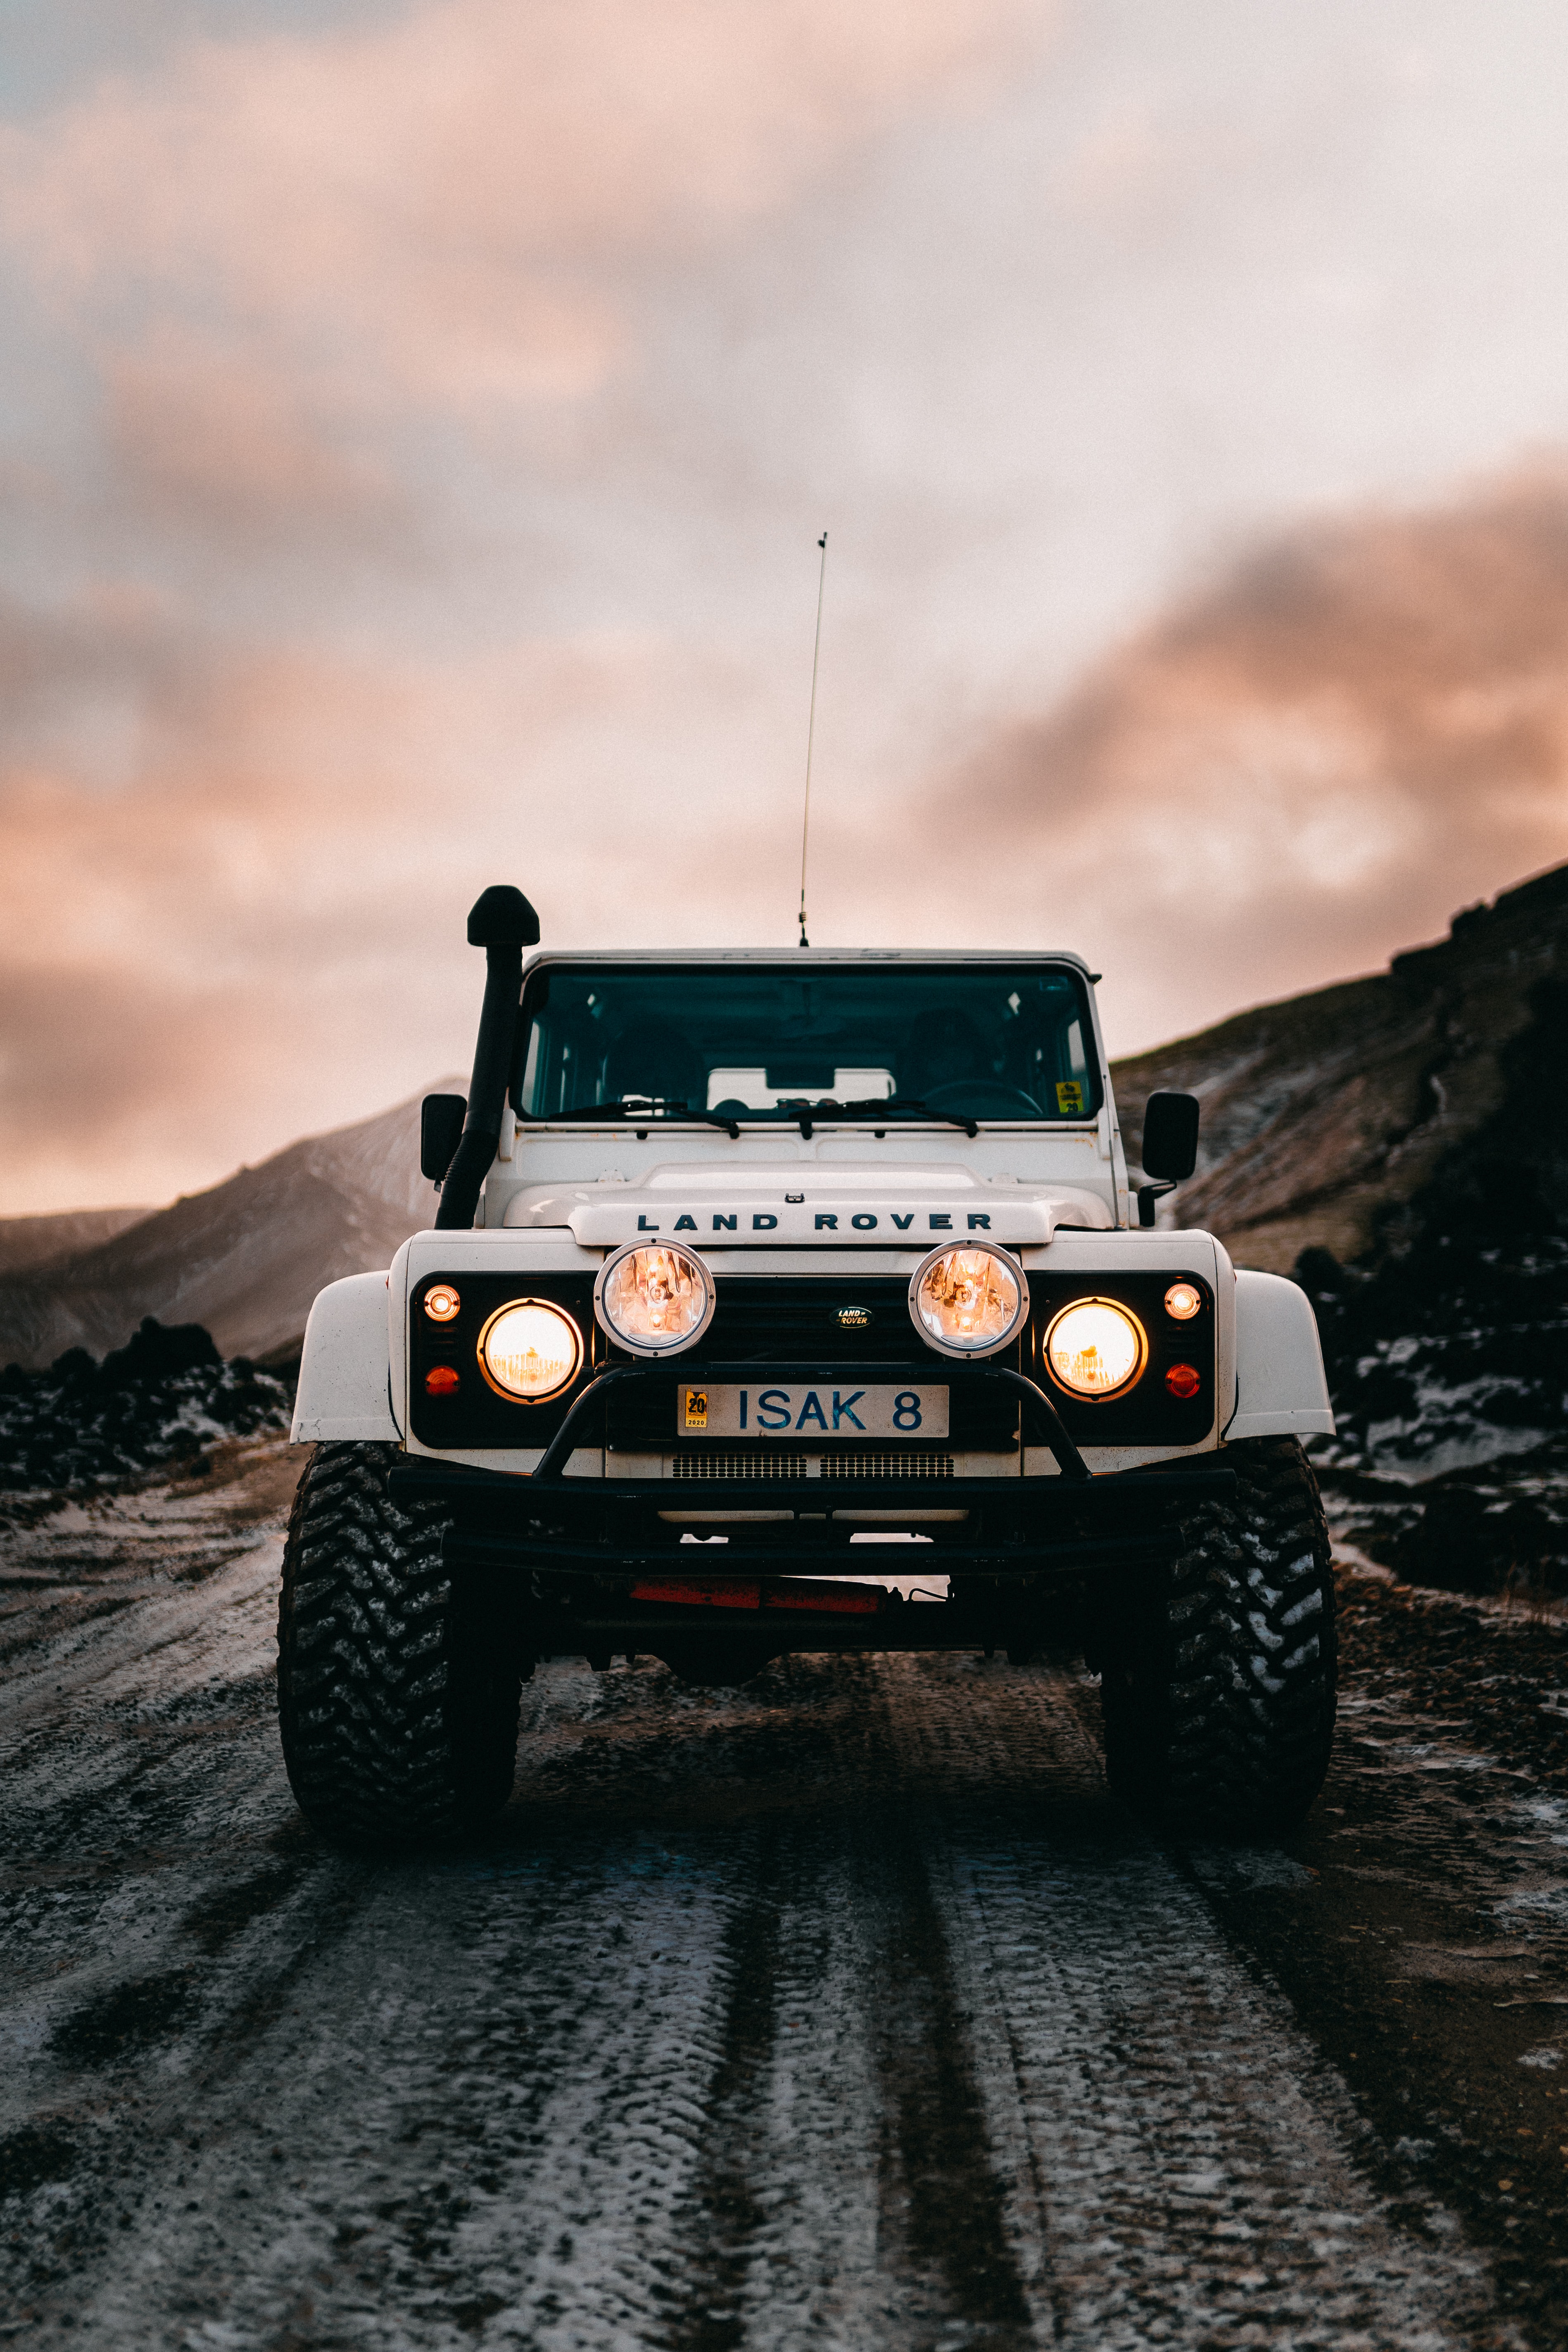 land rover, cars, lights, front view, white, car, machine, headlights Aesthetic wallpaper